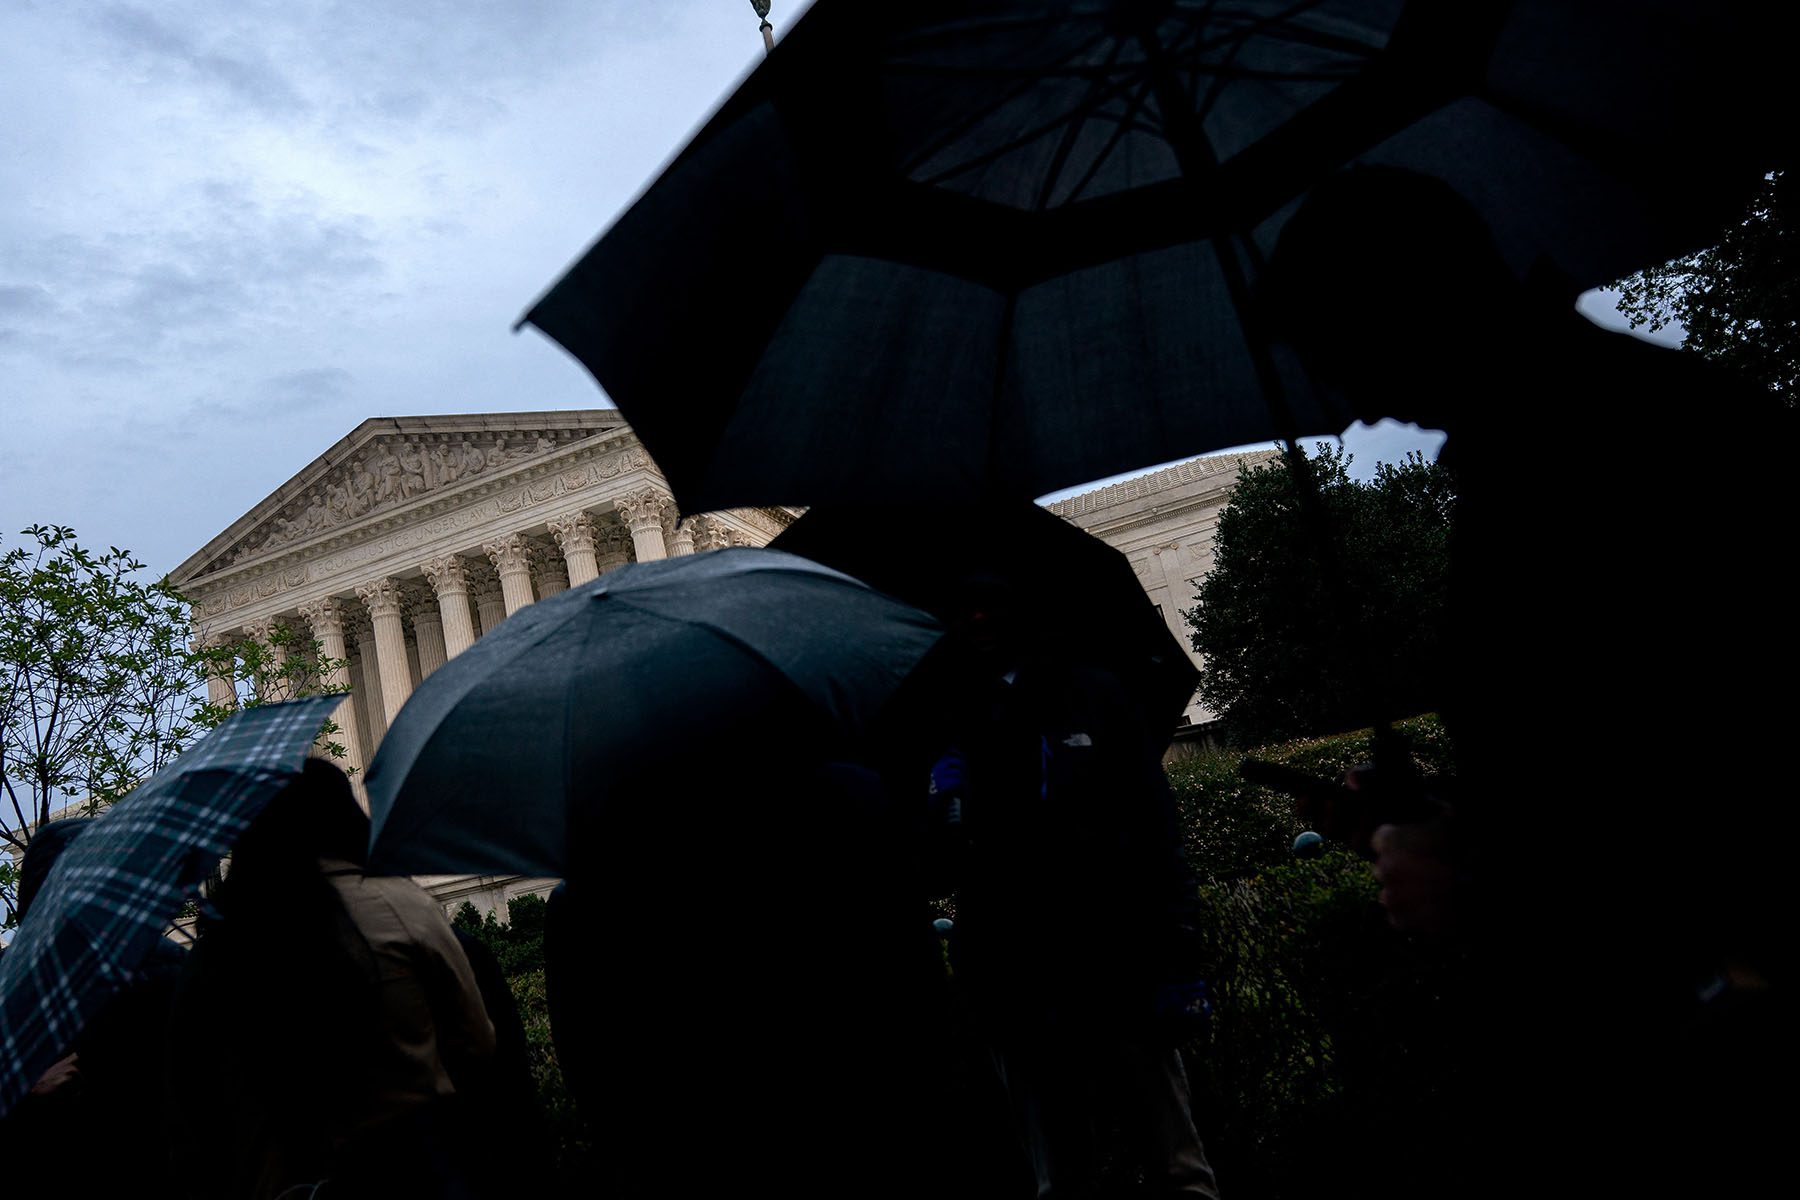 People holding black umbrellas wait in line outside the Supreme Court building on a rainy day.